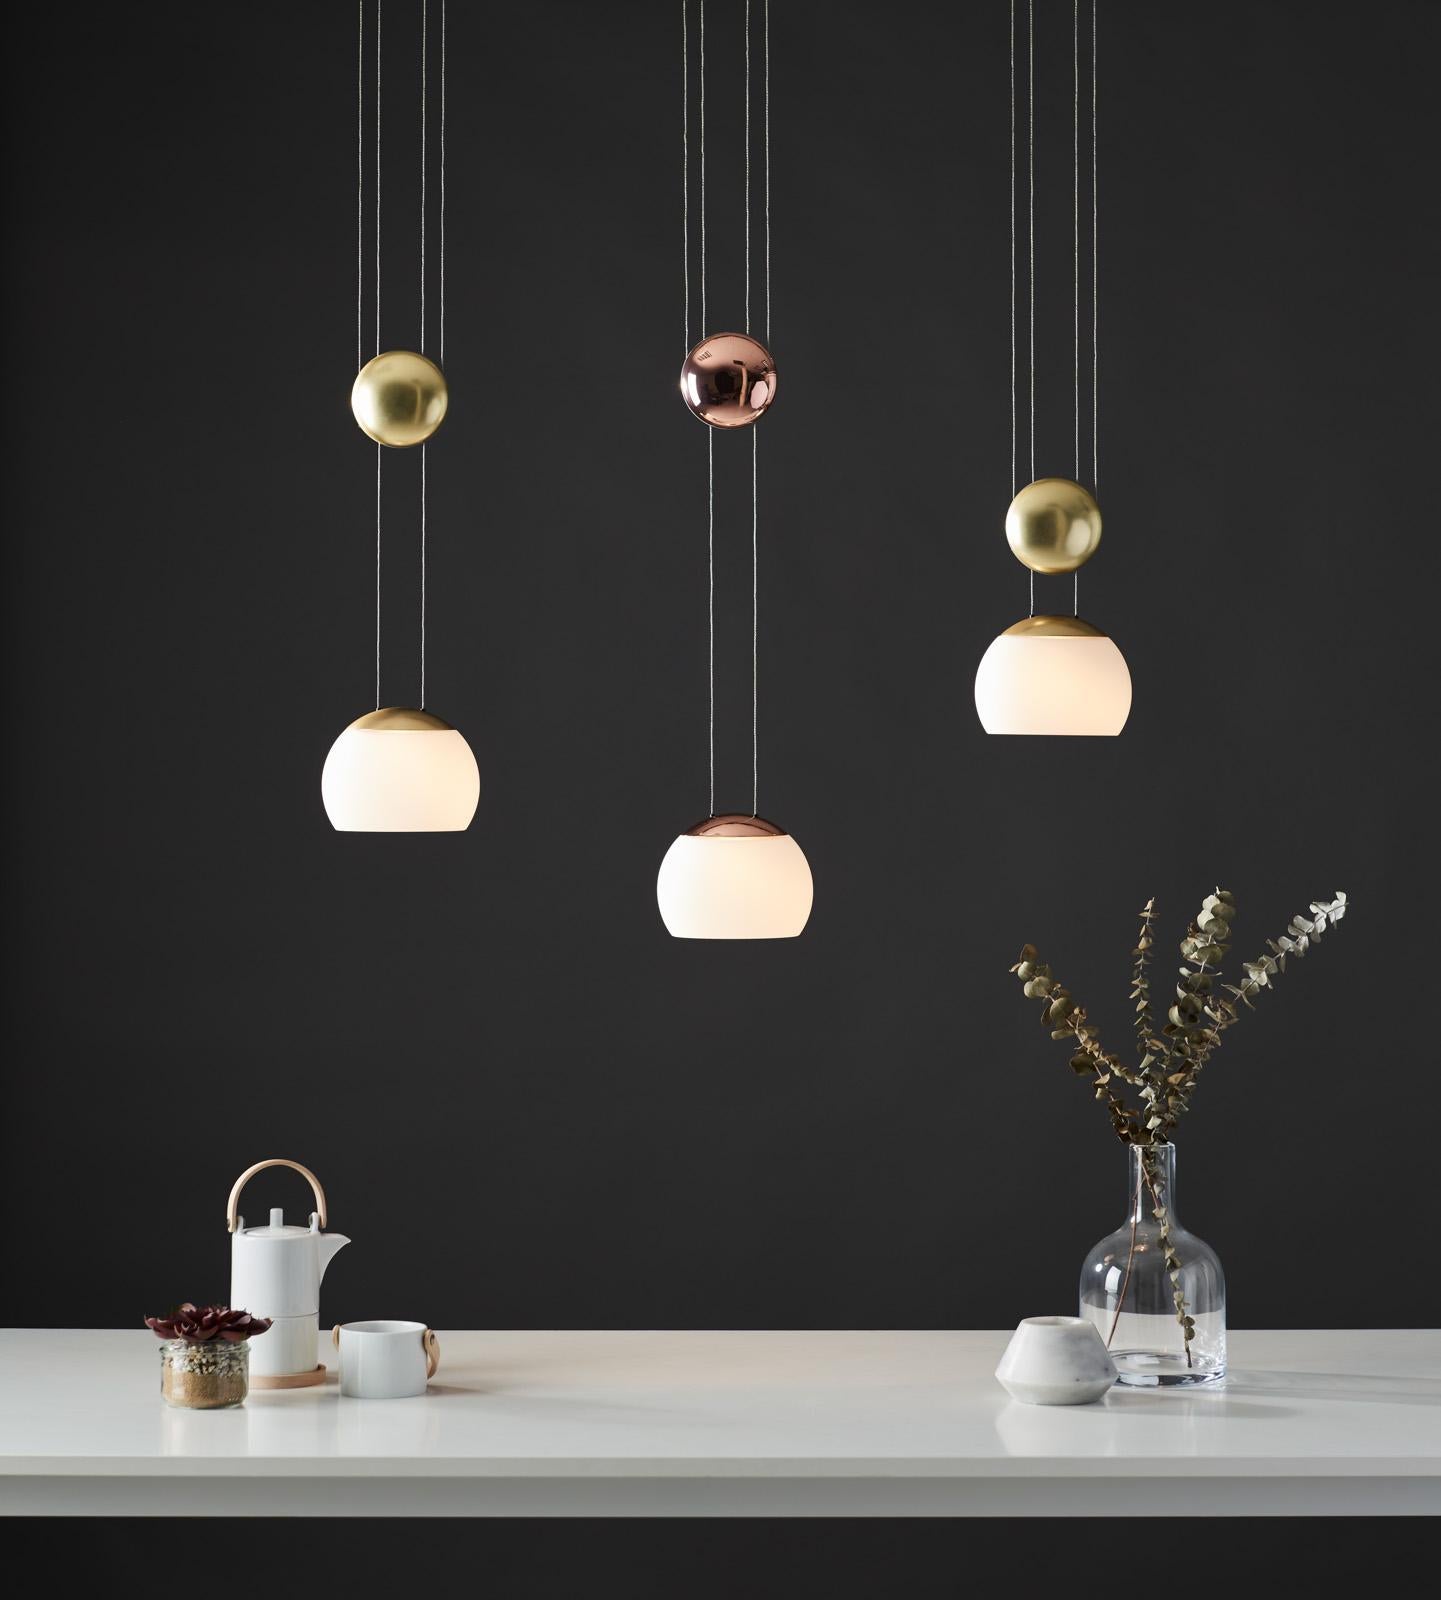 With and adjustable height shade inspired by the movement of a Yo-Yo, the JOJO LED Pendant is a traditional shape with modern sensibilities. Lit with an LED bulb, the JoJo casts a gentle, calm illumination through the mouth-blown opal